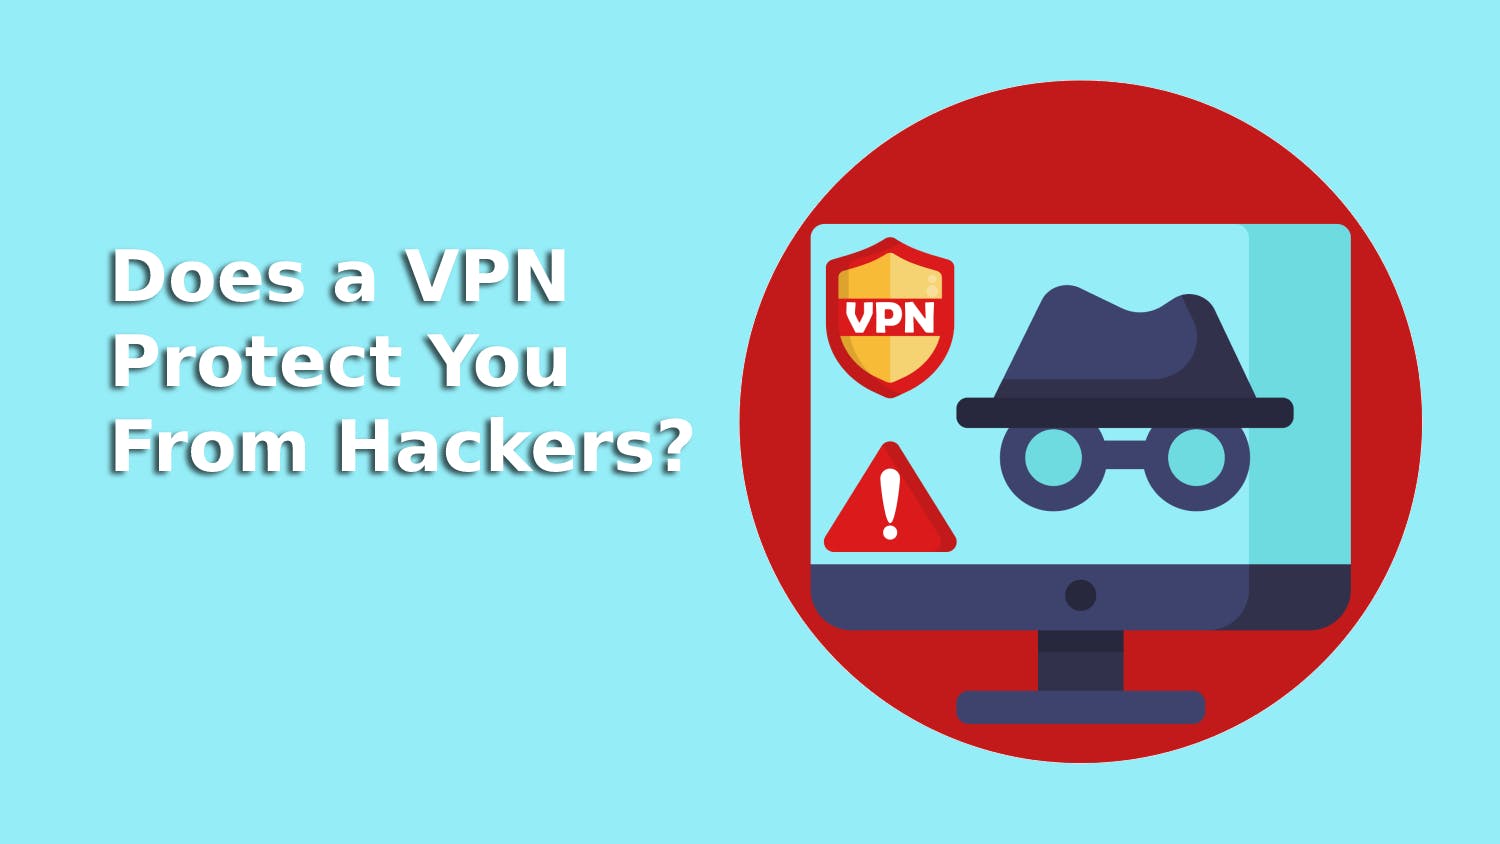 Does a VPN Protect You From Hackers?